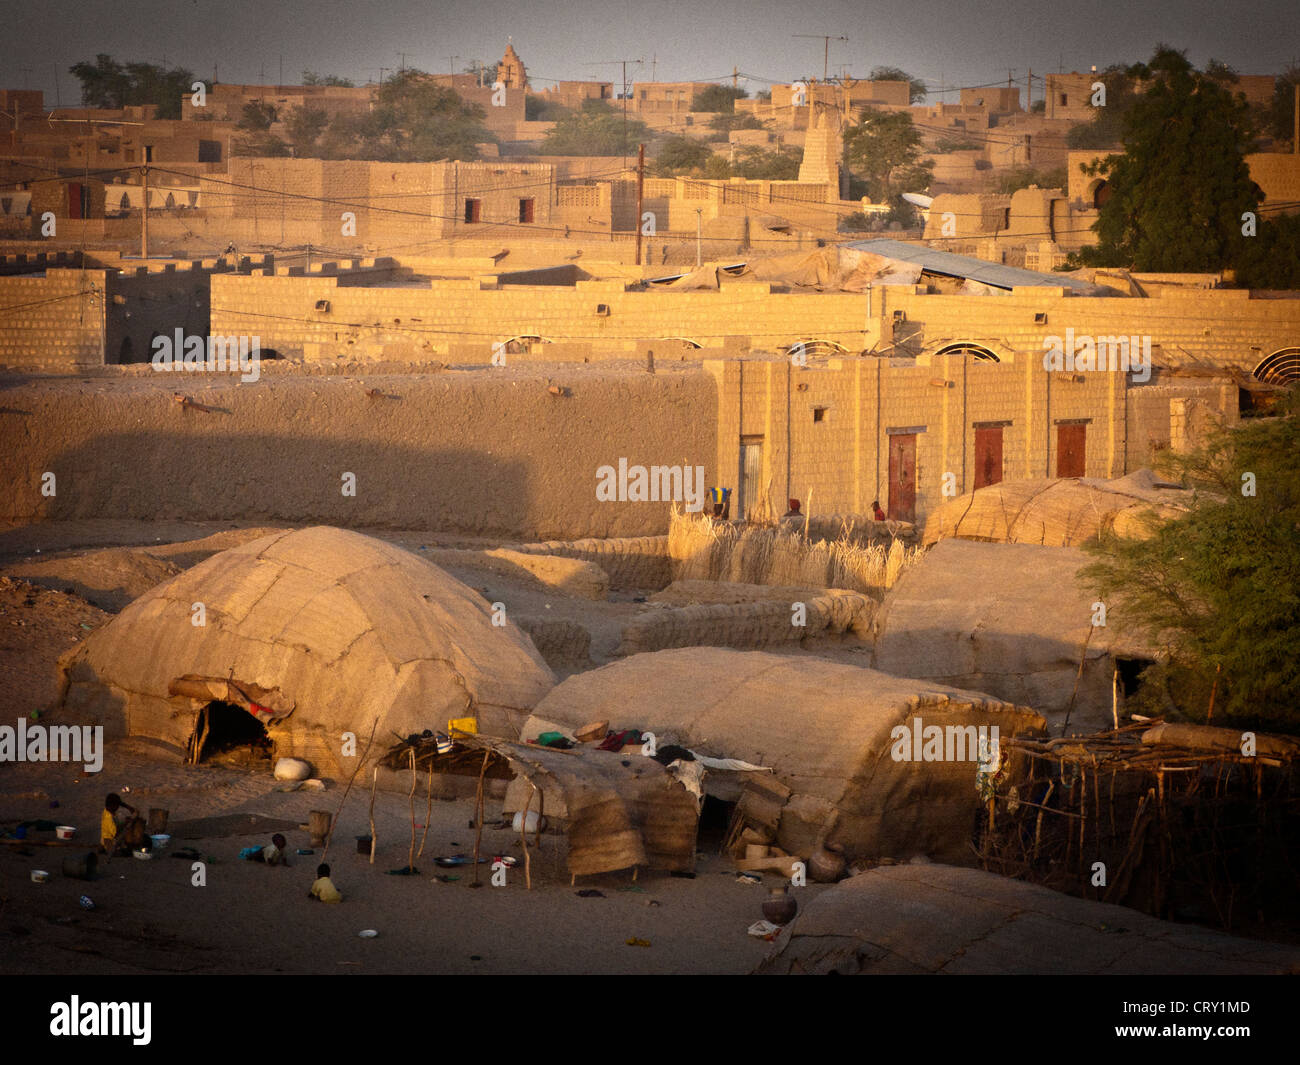 Nomads tents set up on the edge of Timbuktu old town, Mali .Africa. Stock Photo